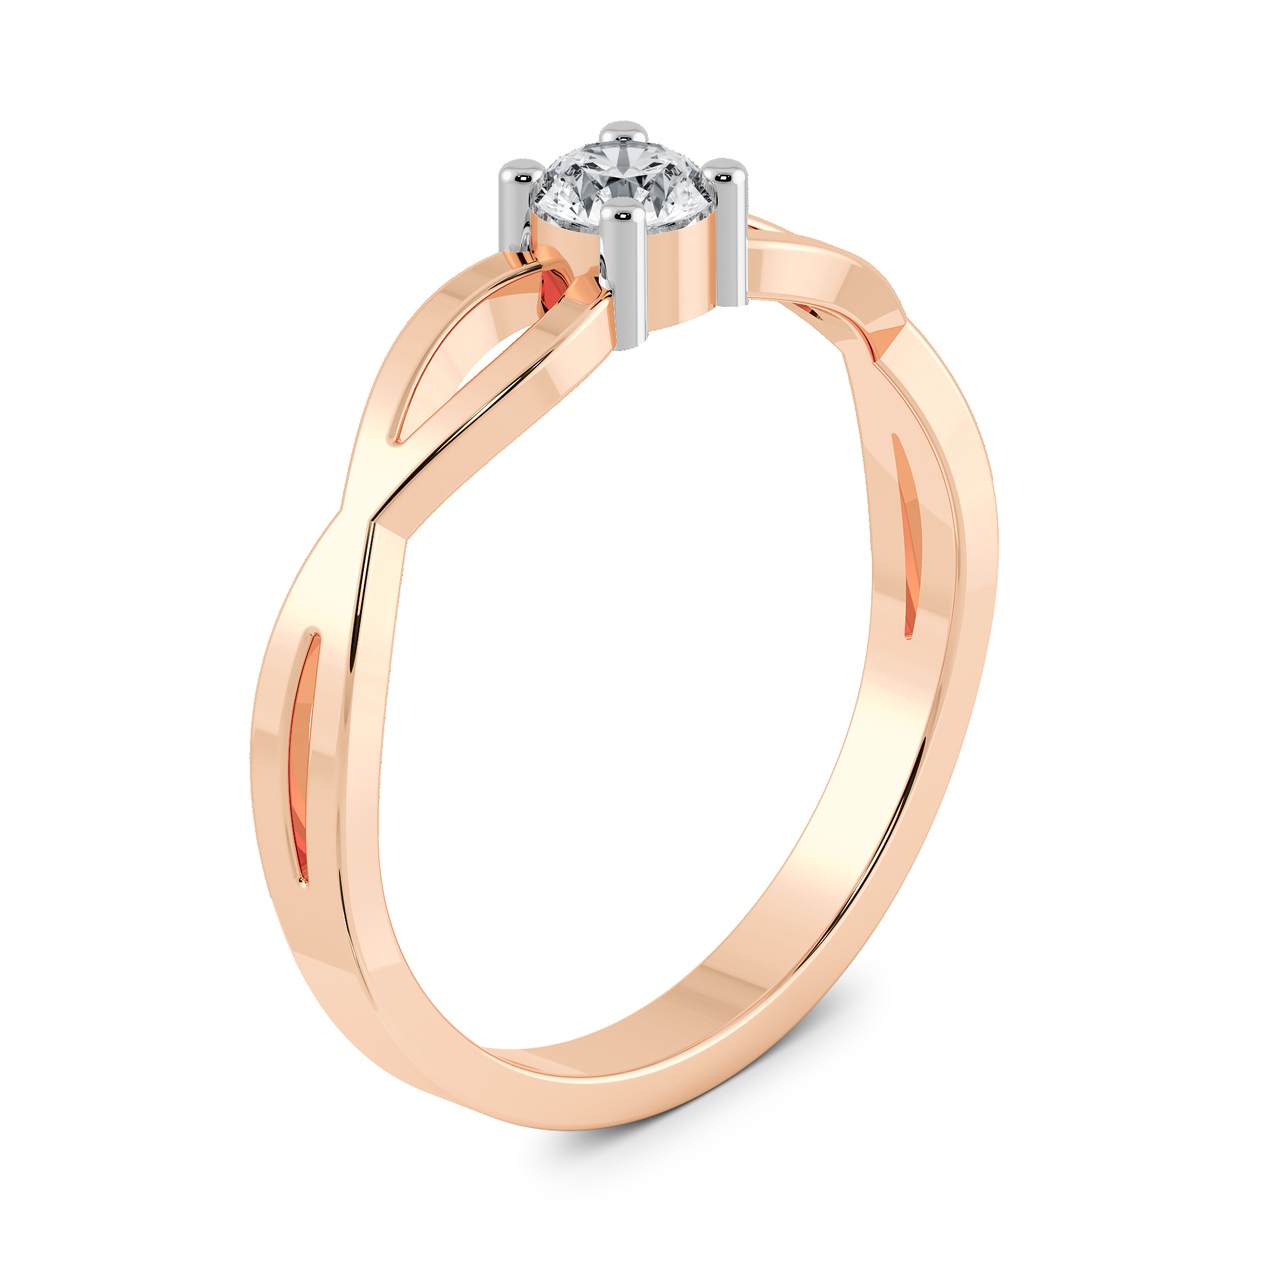 Royal Design Solitaire Ring